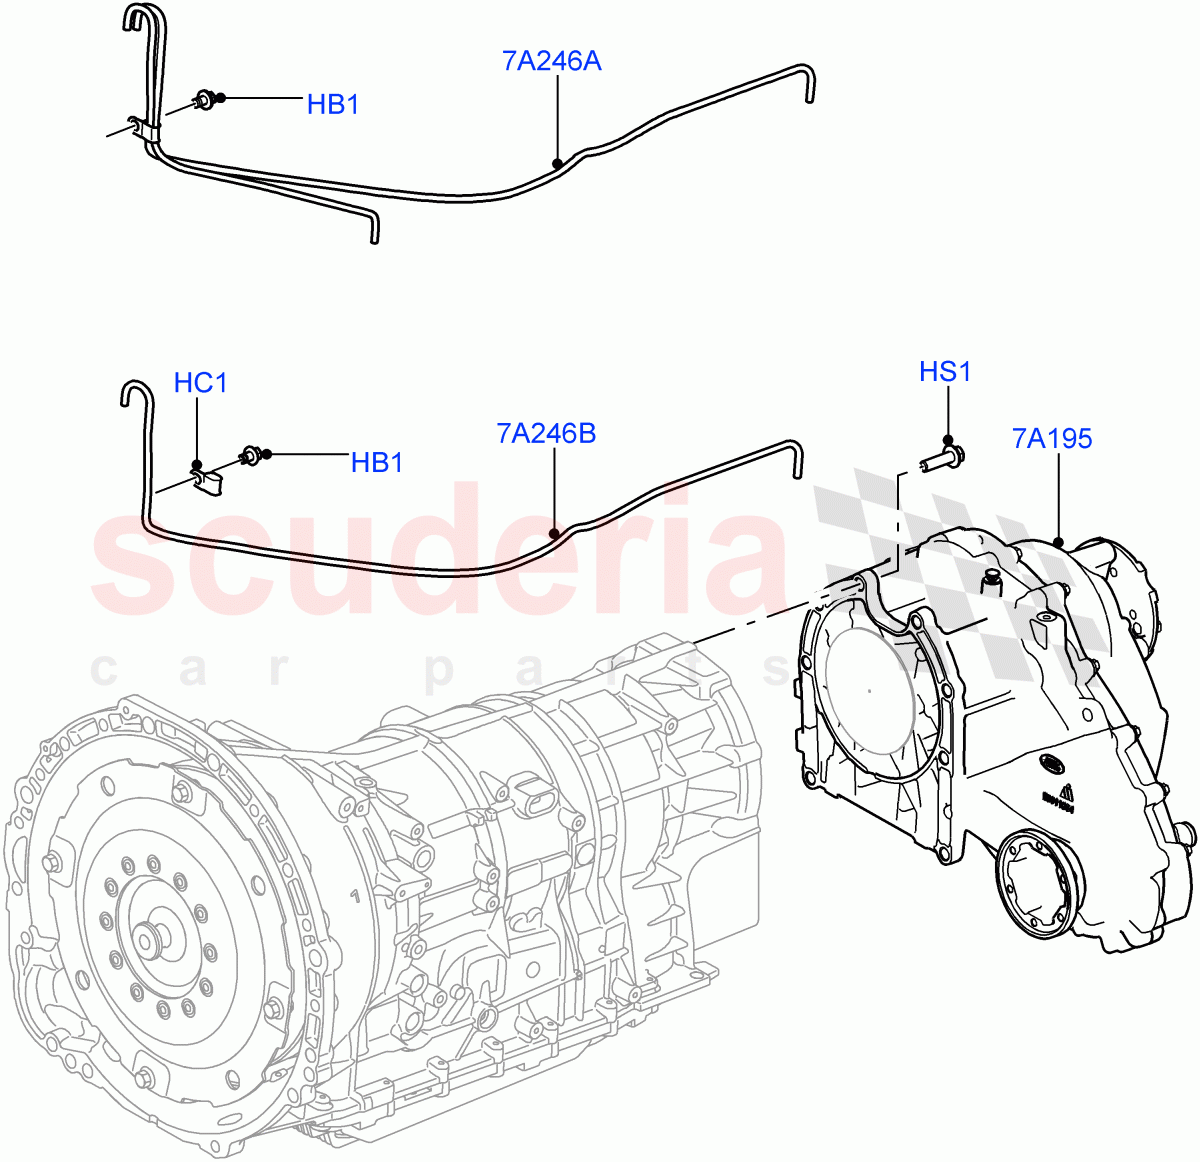 Transfer Drive Case(8 Speed Auto Trans ZF 8HP45,With 1 Speed Transfer Case,8 Speed Auto Trans ZF 8HP70 4WD)((V)FROMEA000001,(V)TOGA999999) of Land Rover Land Rover Range Rover Sport (2014+) [2.0 Turbo Petrol AJ200P]